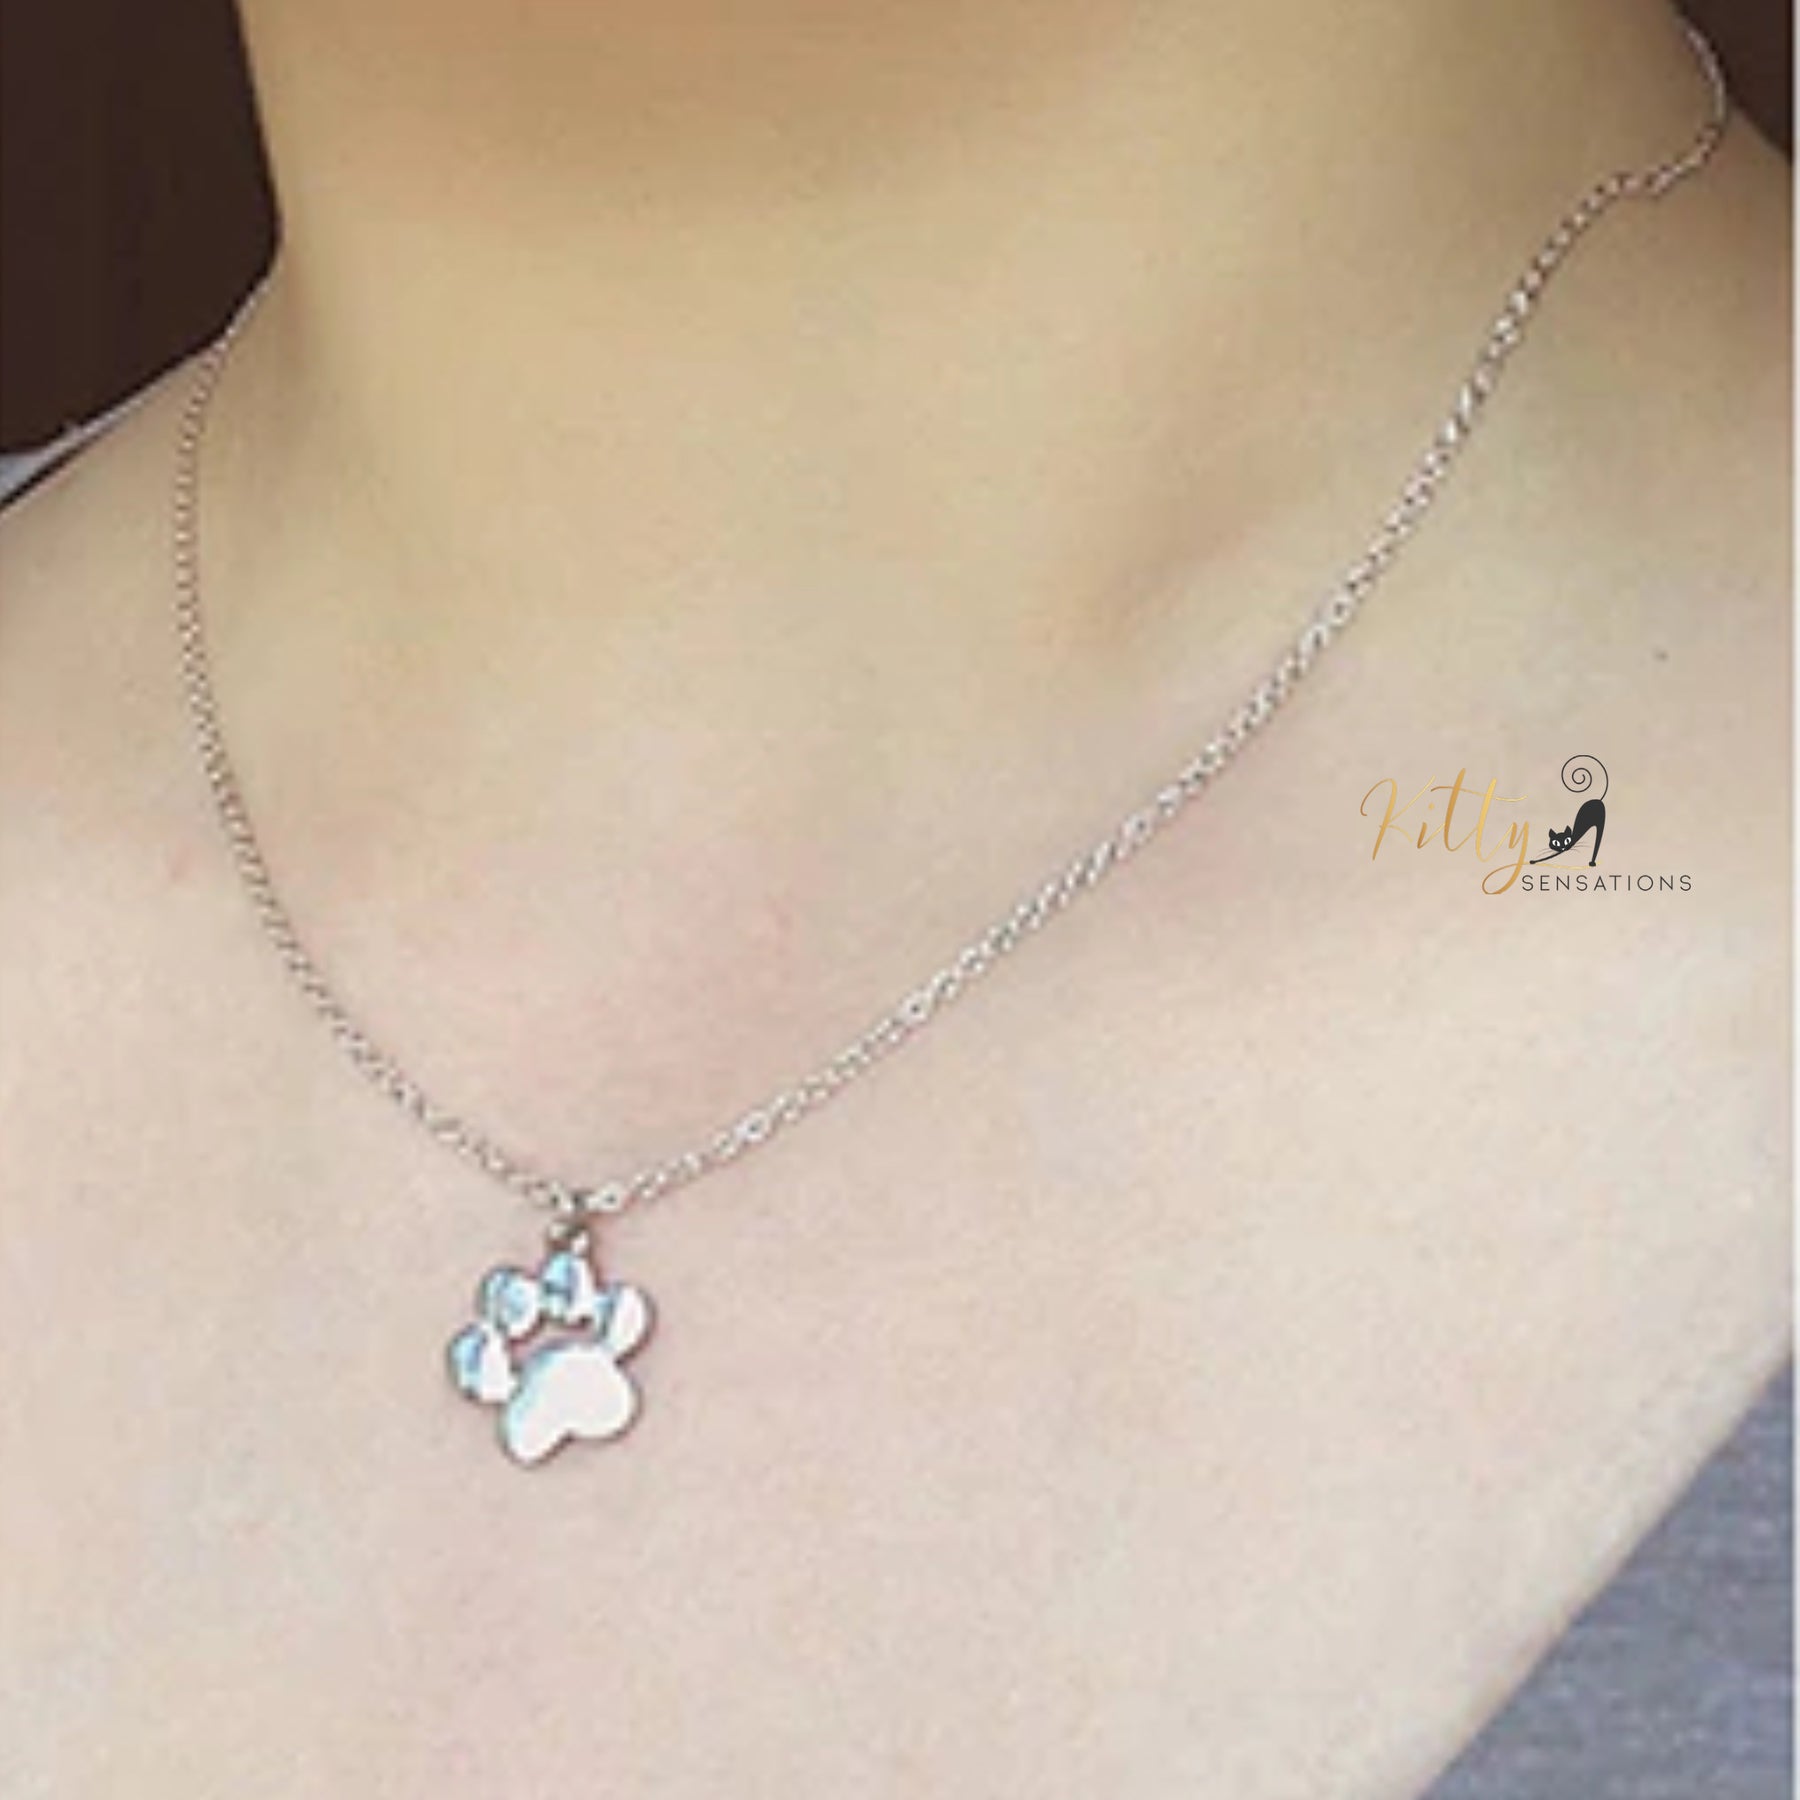 Solid Kitty Paw Necklace in Solid 925 Sterling Silver (Platinum or Rose Gold Plated)